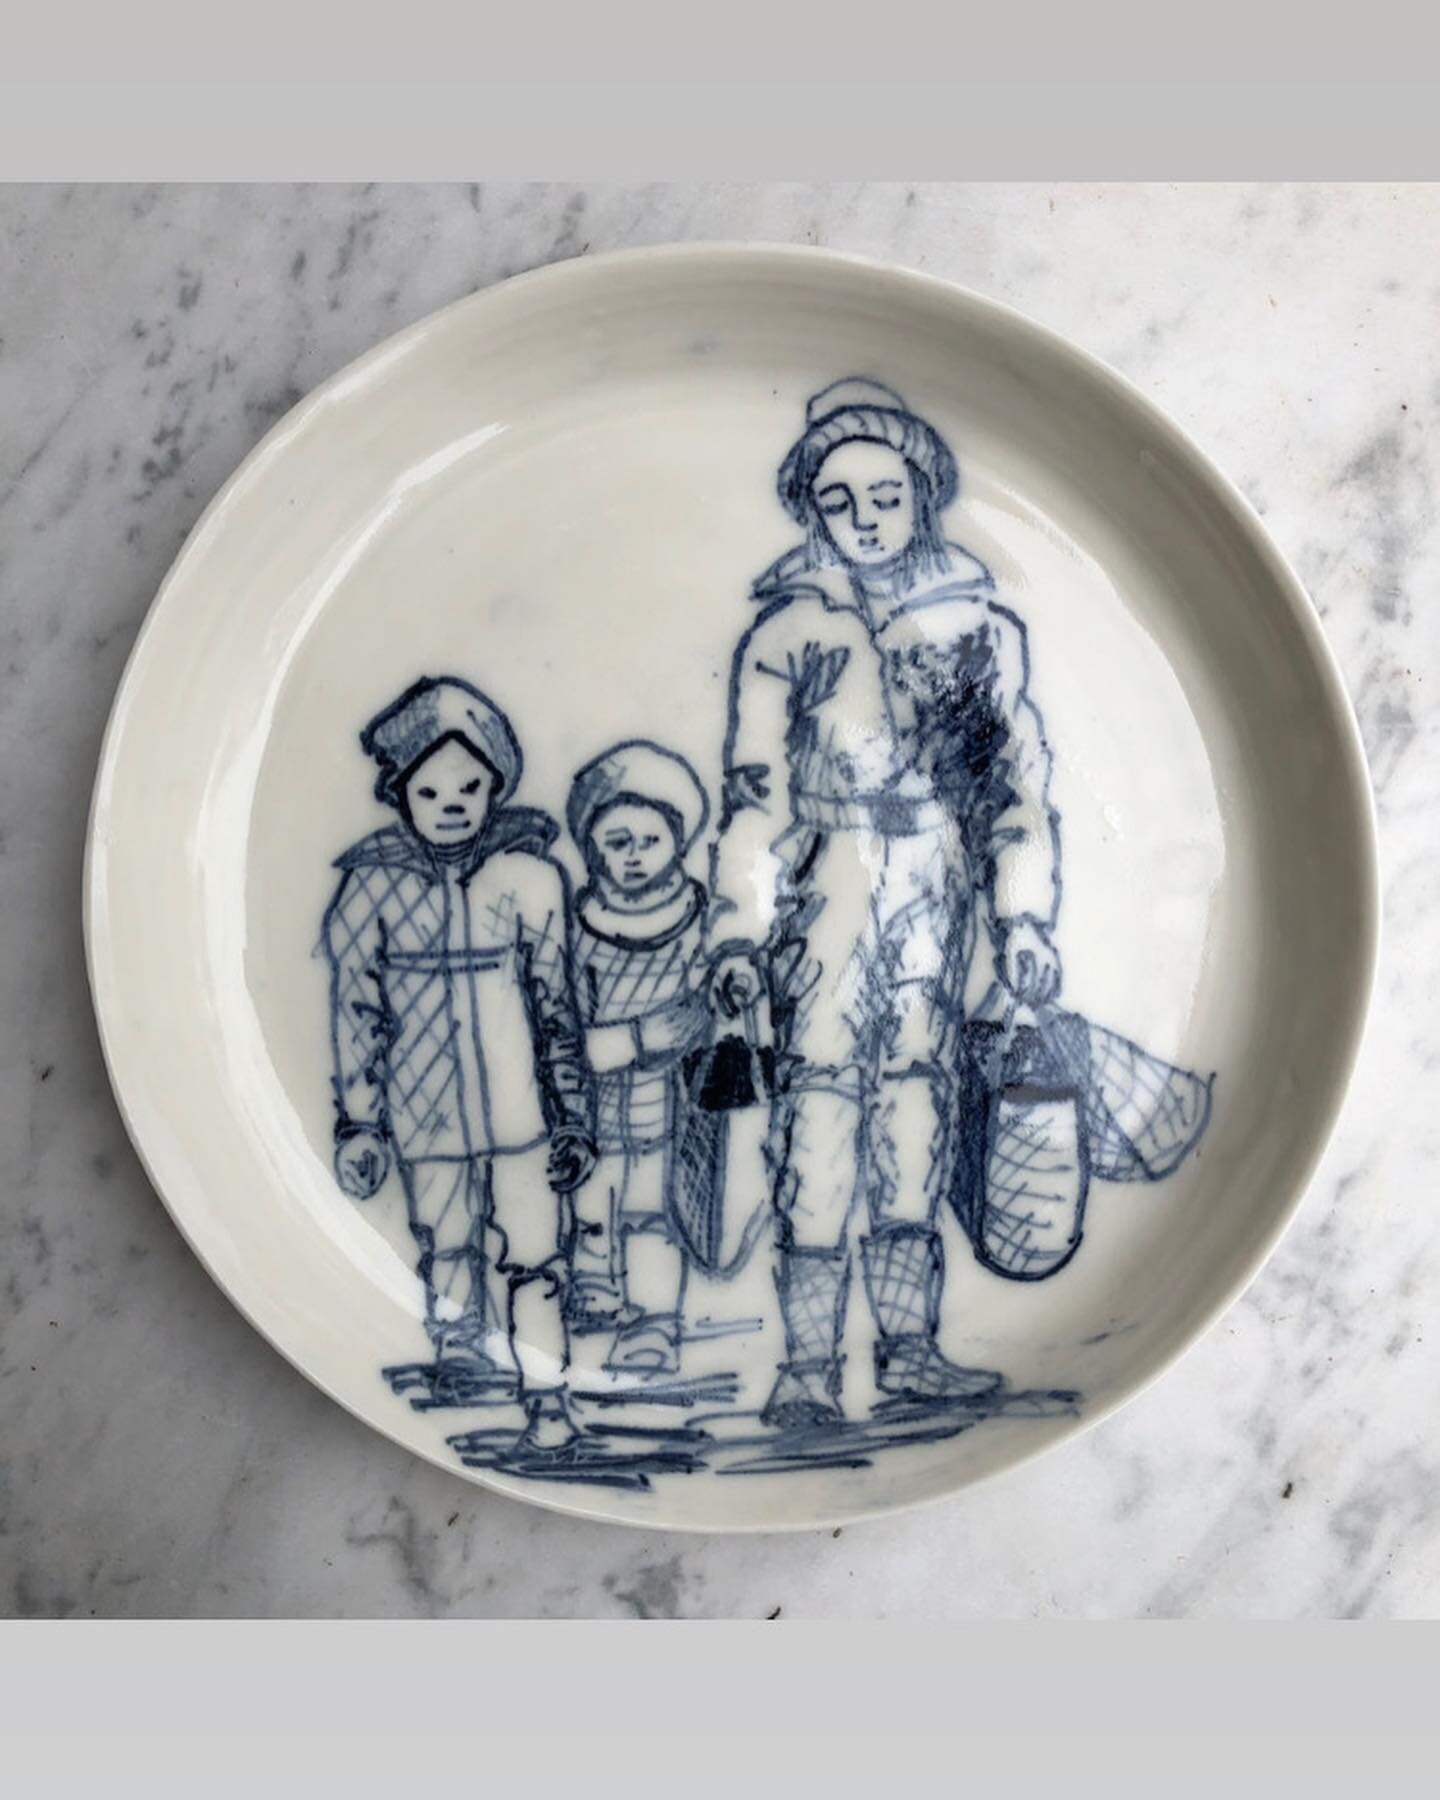 Porcelain narrative plates recording the plight of the refugees fleeing from Ukraine clutching their children and their essential belongings. Such sad images but feel that it must be remembered as this war tragically continues. Finally out the kiln. 